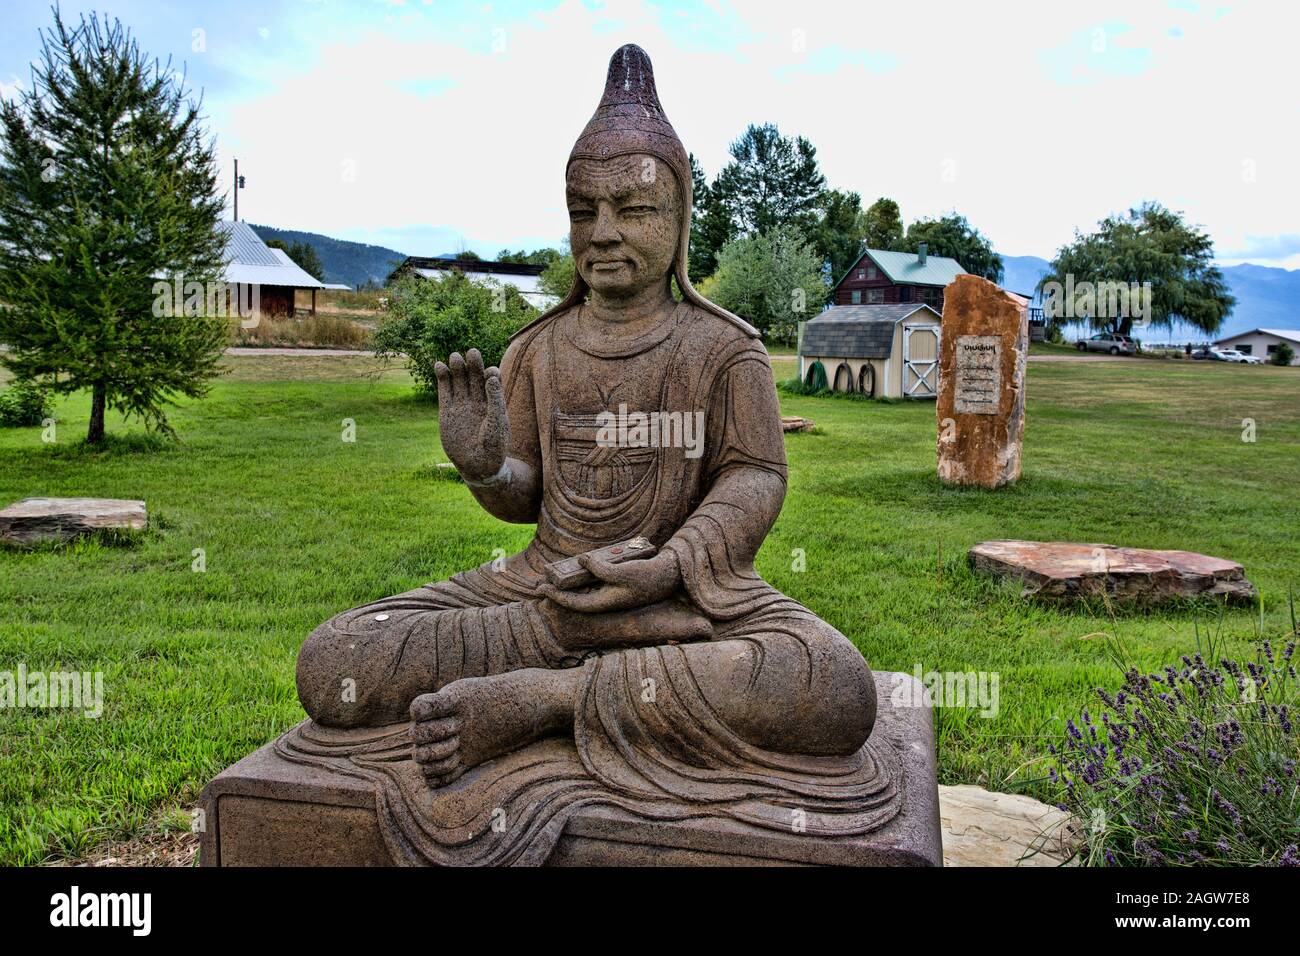 Views Of The Garden Of One Thousand Buddhas In Western Montana